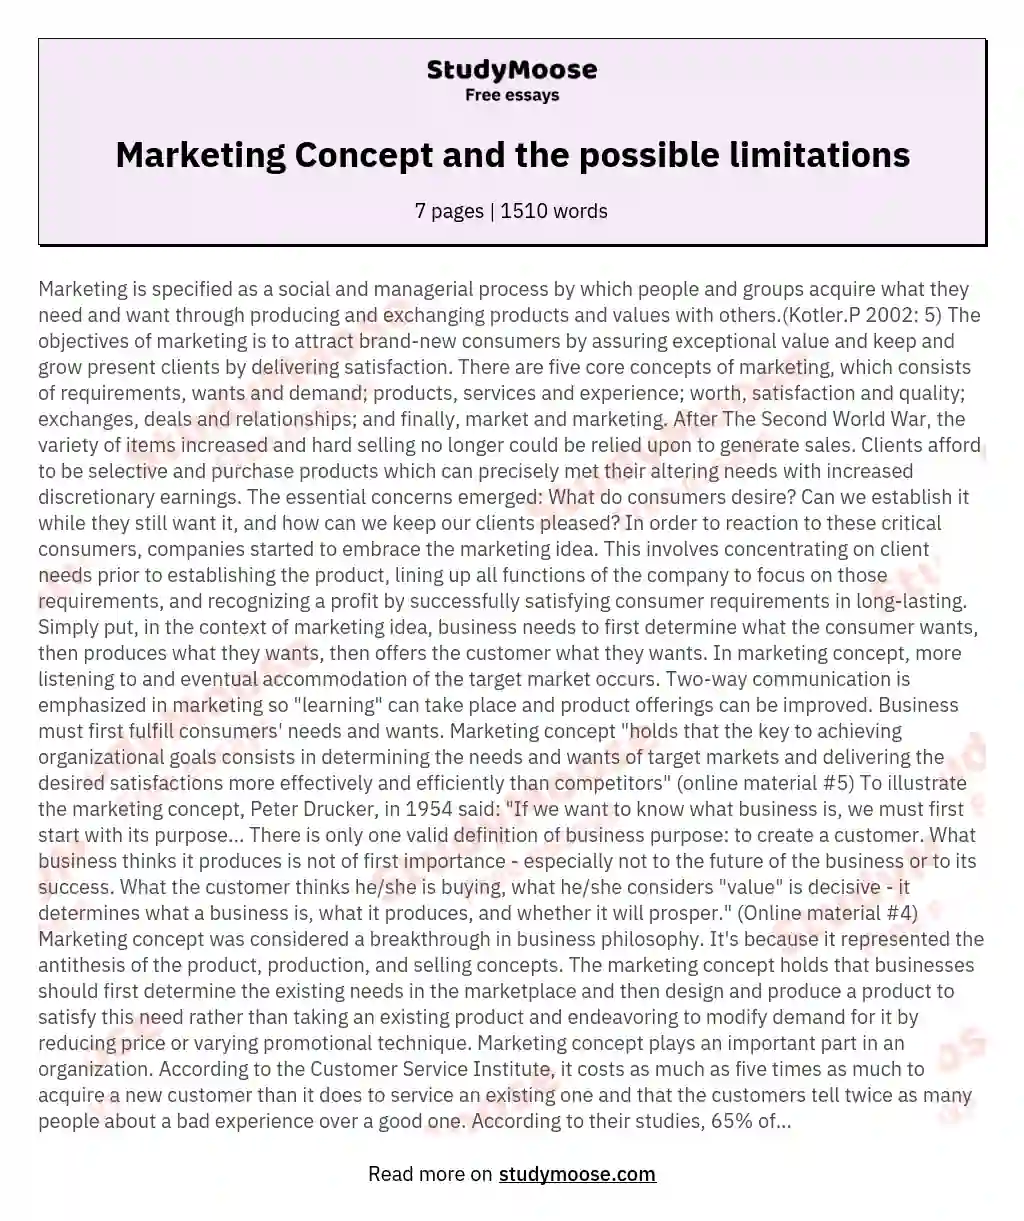 Marketing Concept and the possible limitations